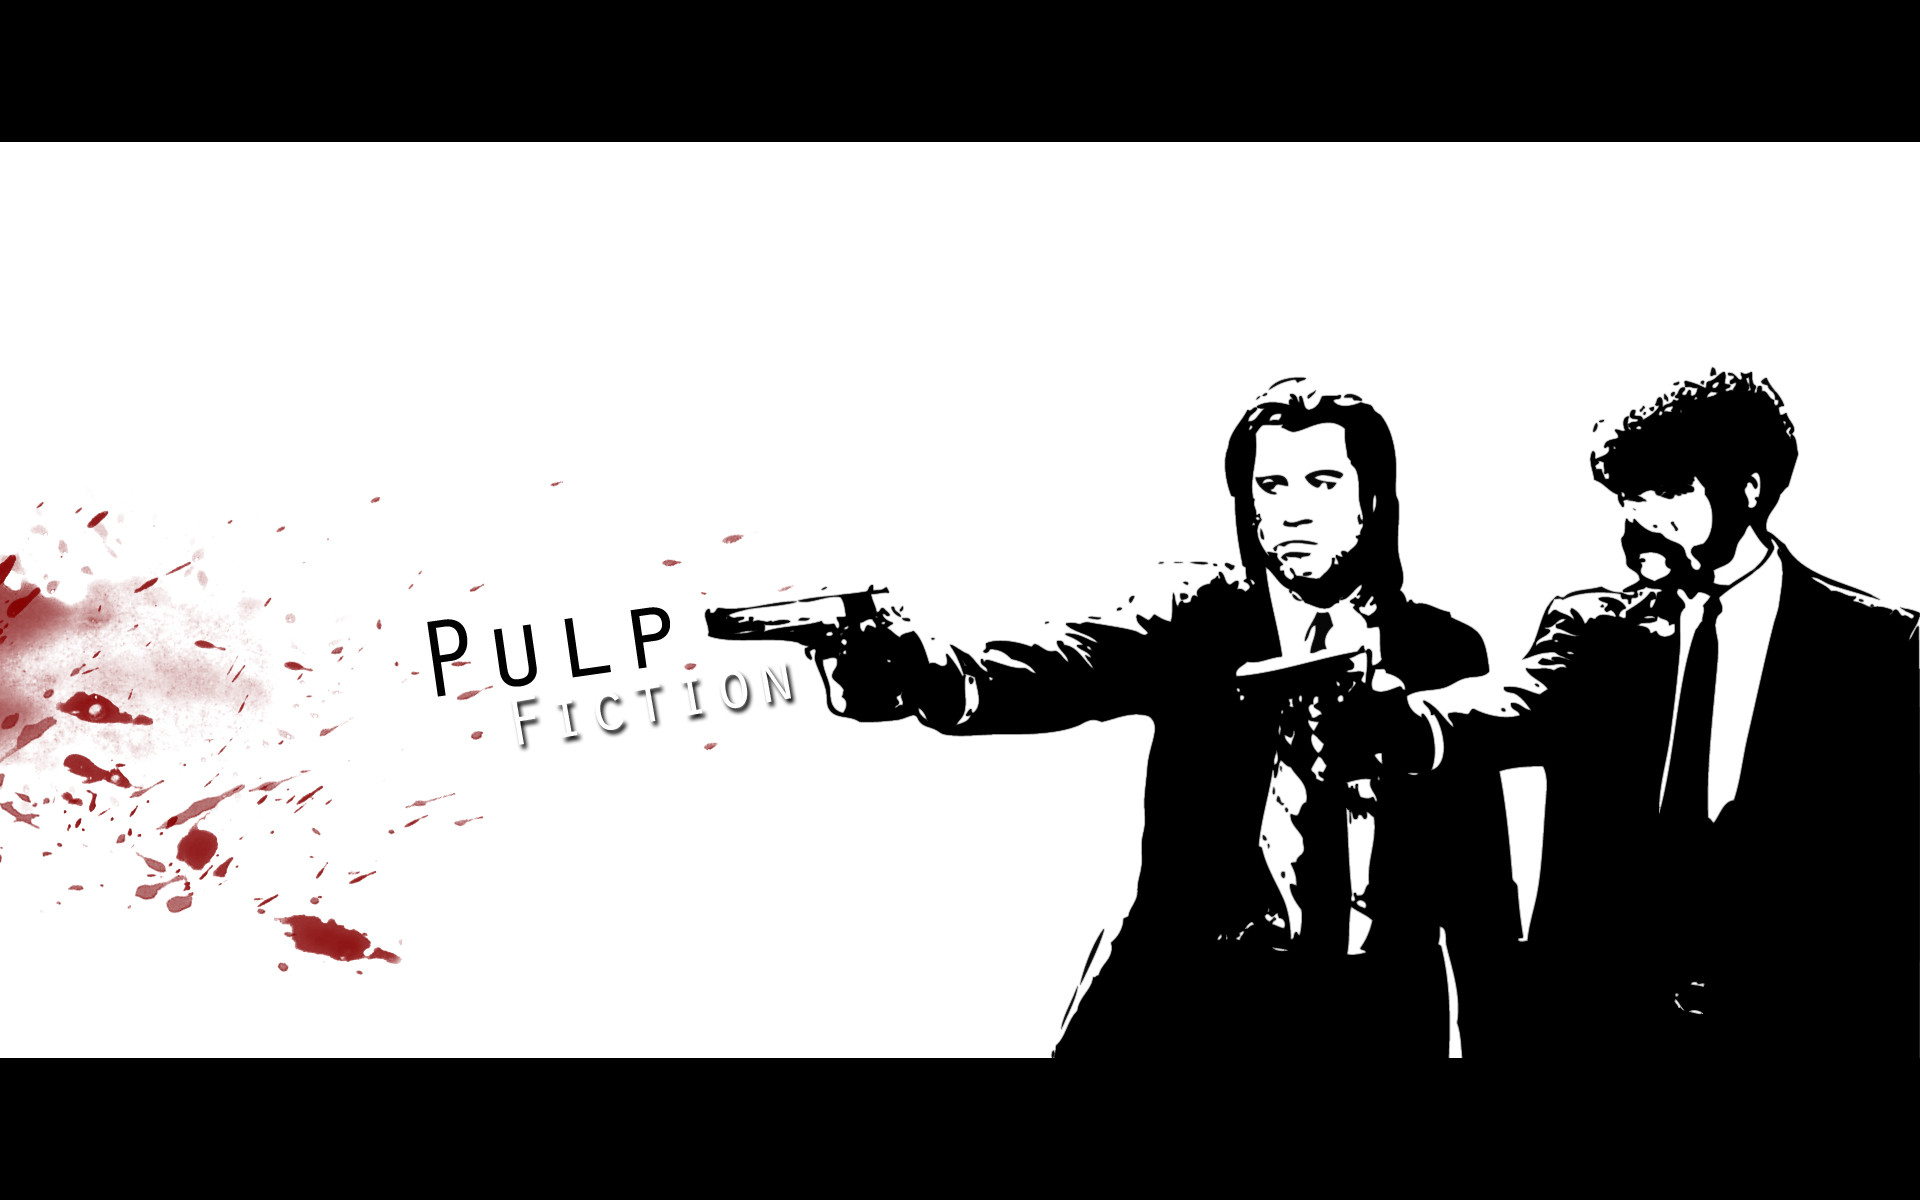 1920x1200 Pulp Fiction 08 by Hyphernate